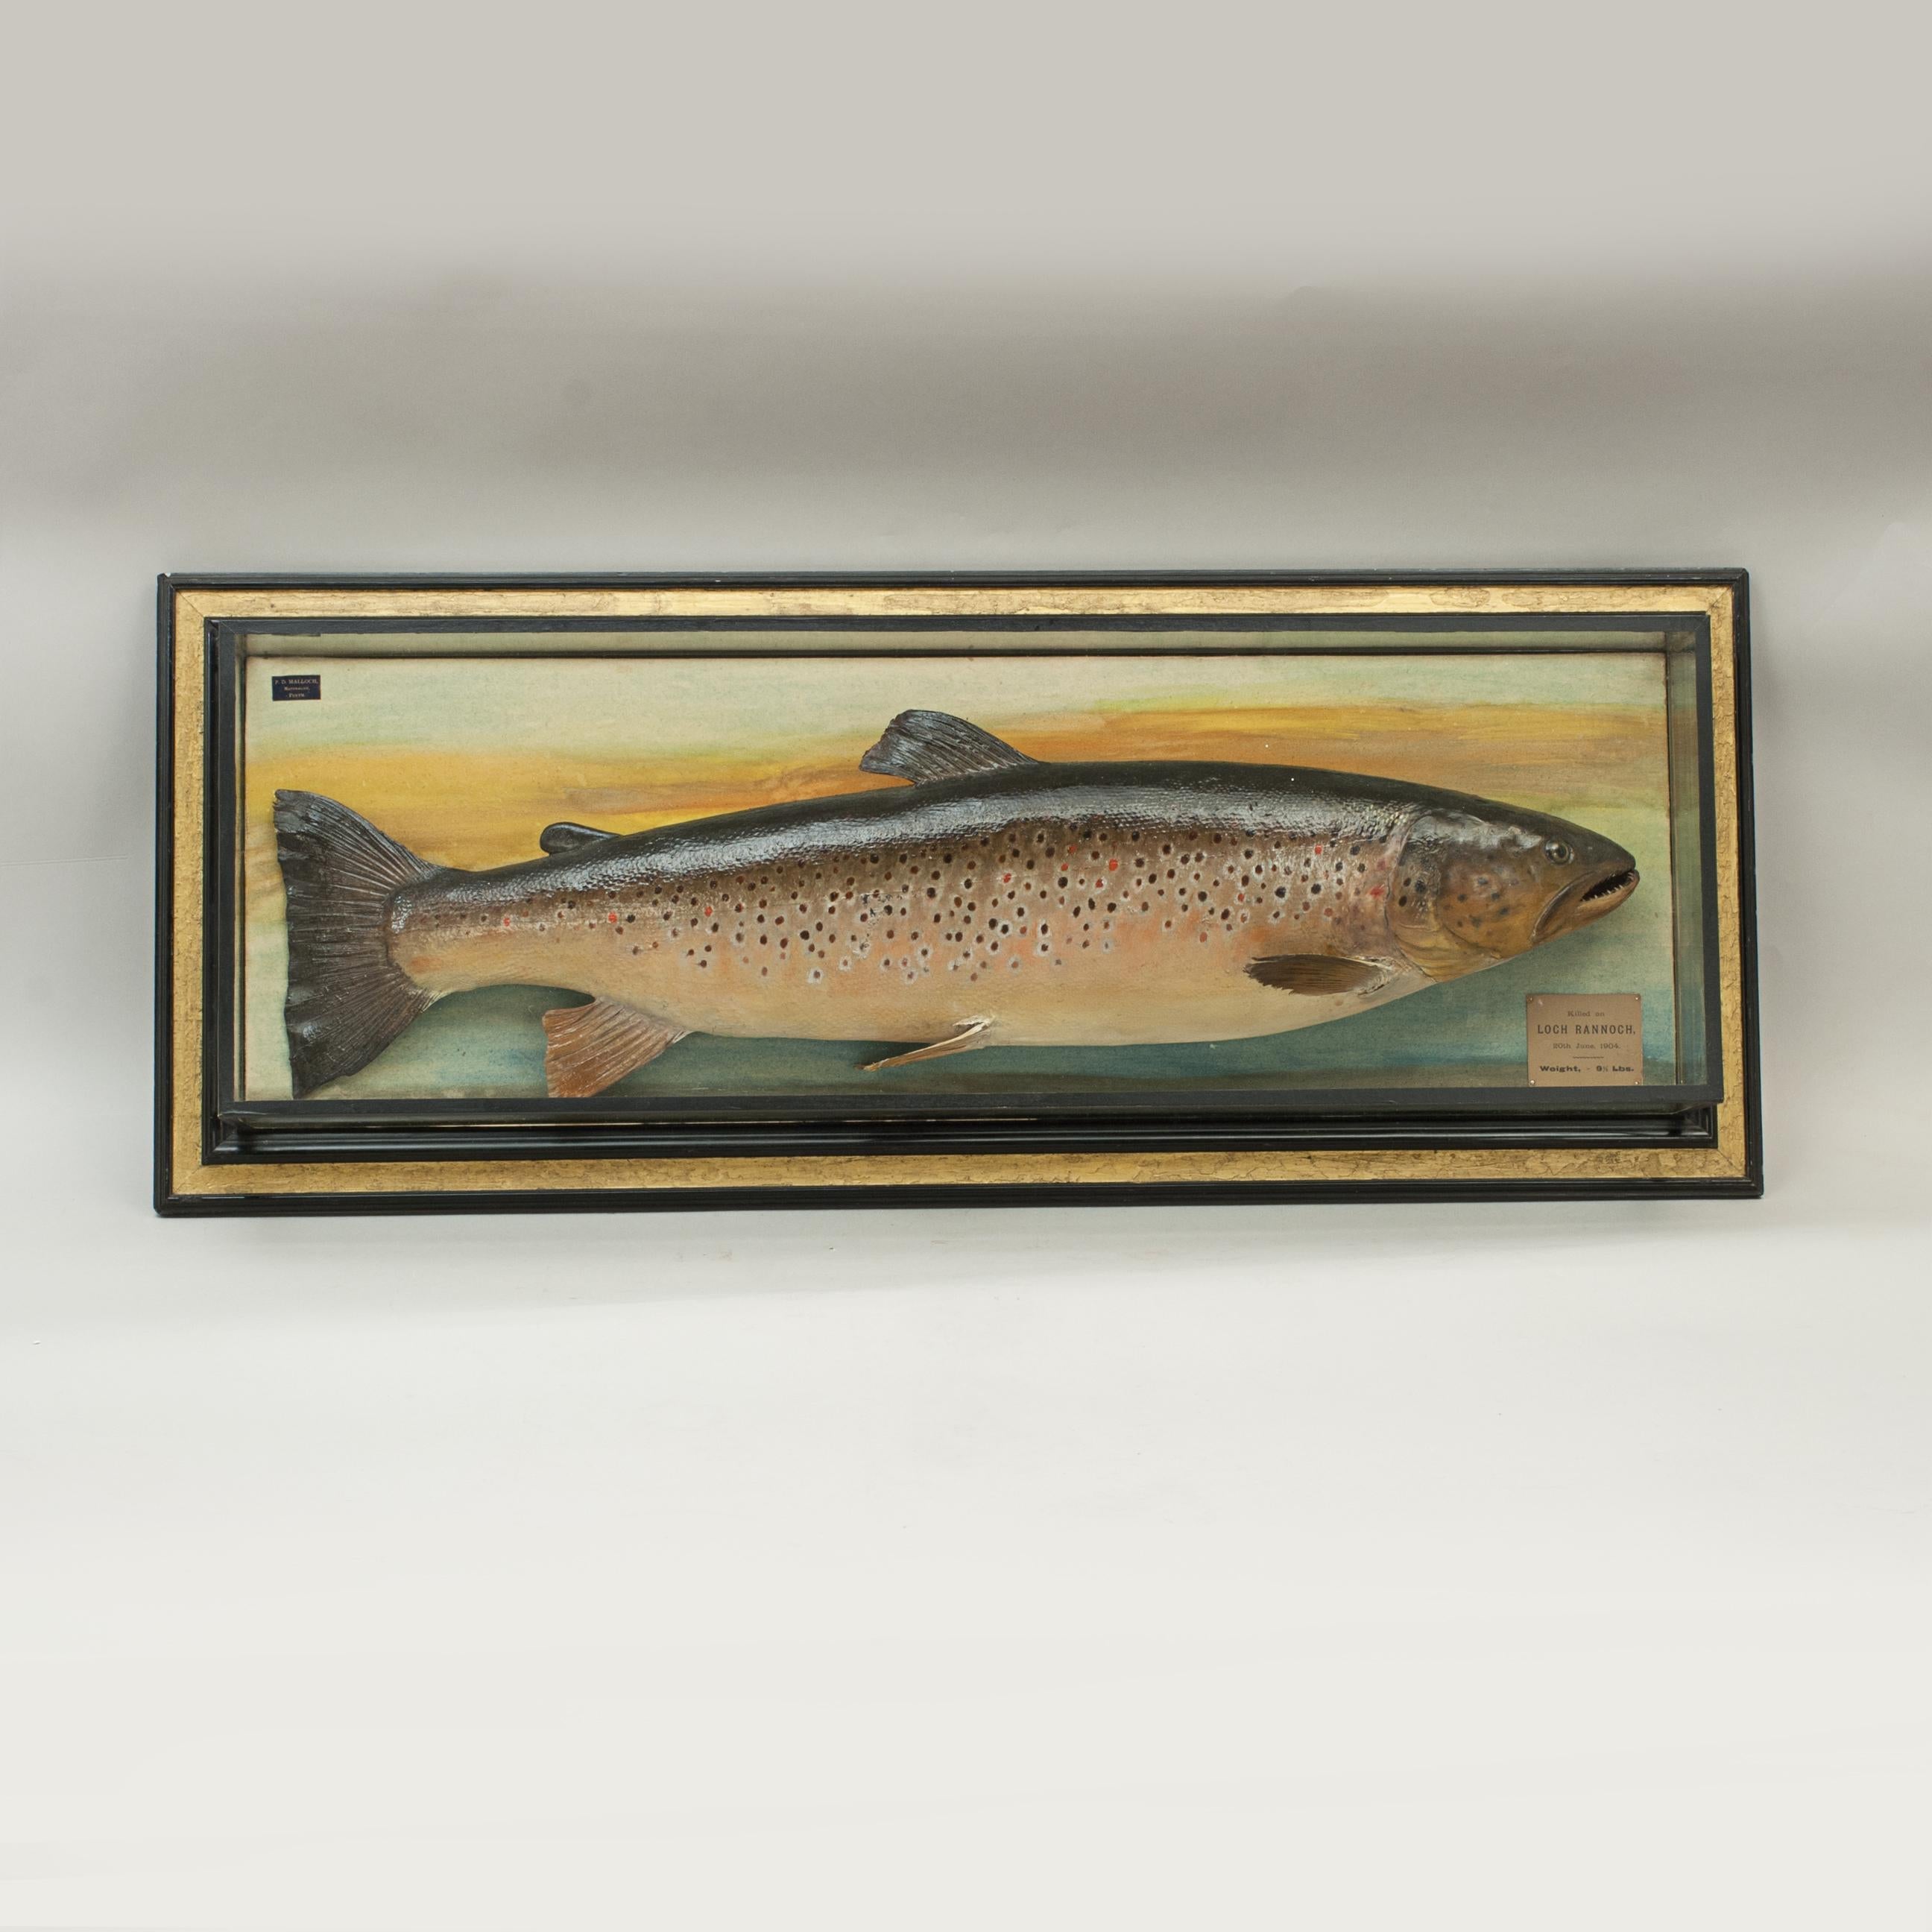 Antique Trophy Fish Model of a Brown Trout by Malloch of Perth 2